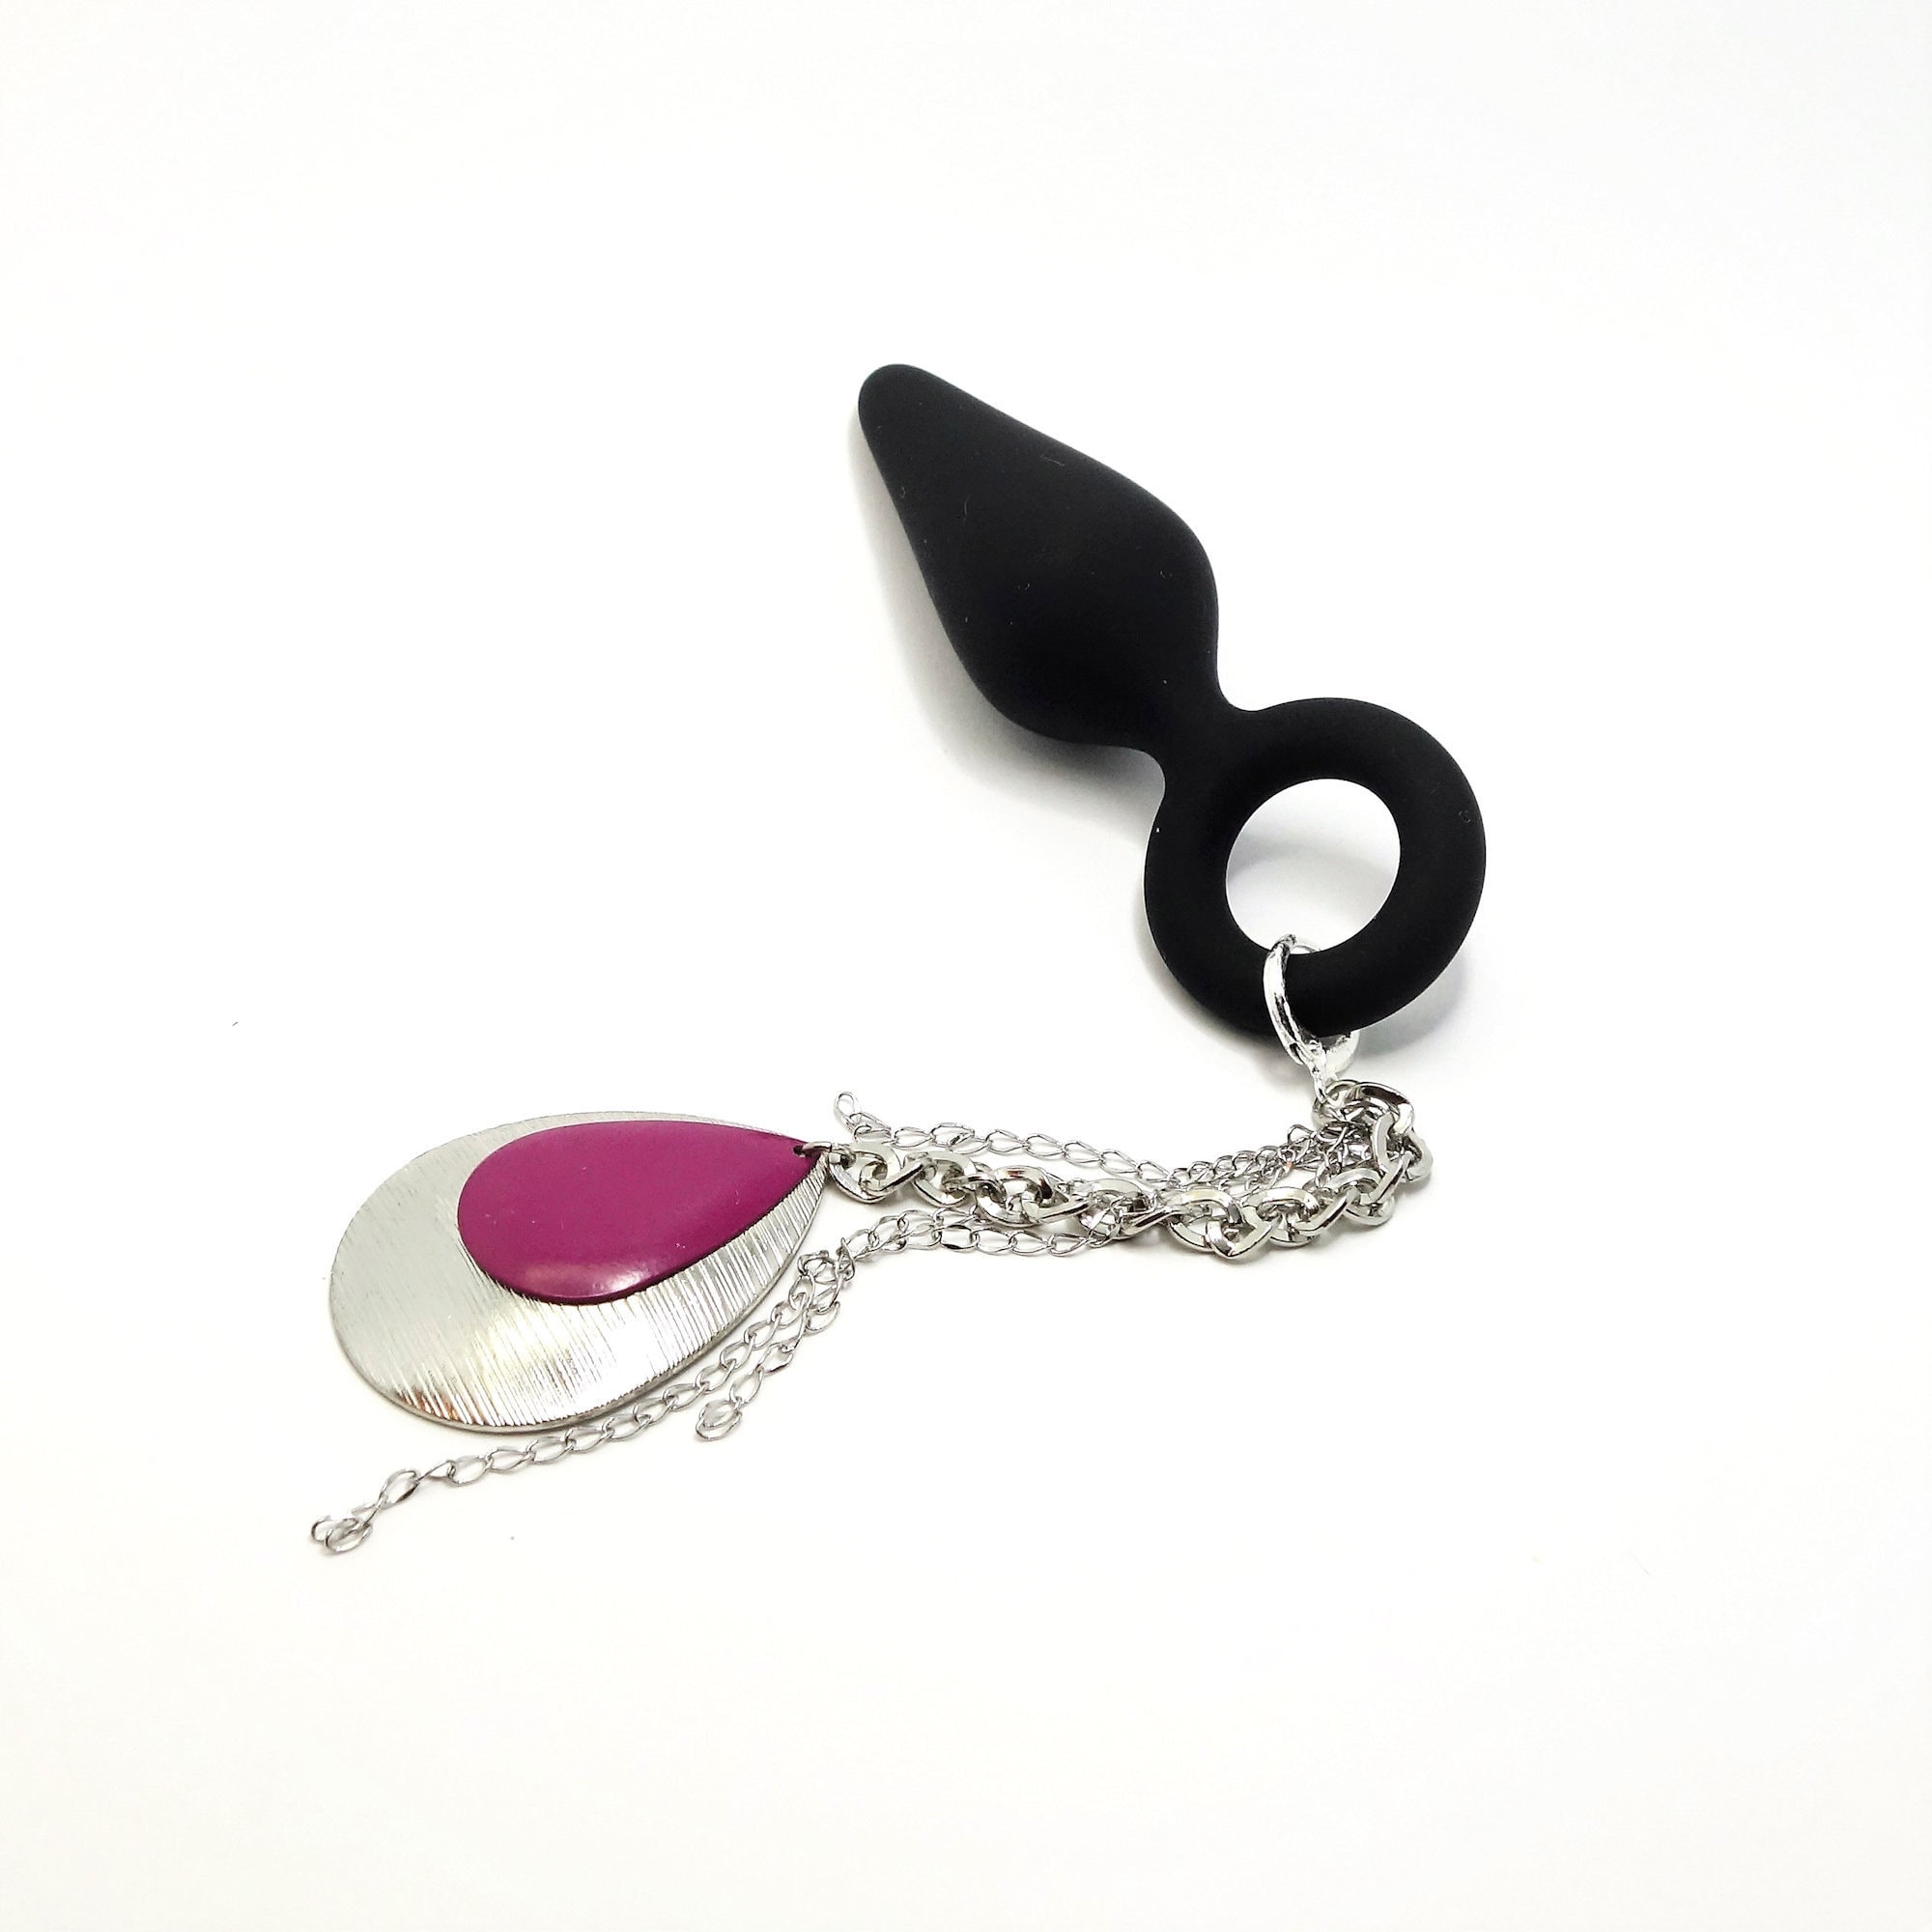 Jewelry for Anal Plug Ring Butt Plug Anal Jewelry Cascades Amethyst Stone Tassel with Optional Plug Under The Hoode Intimate Jewelry Gifts